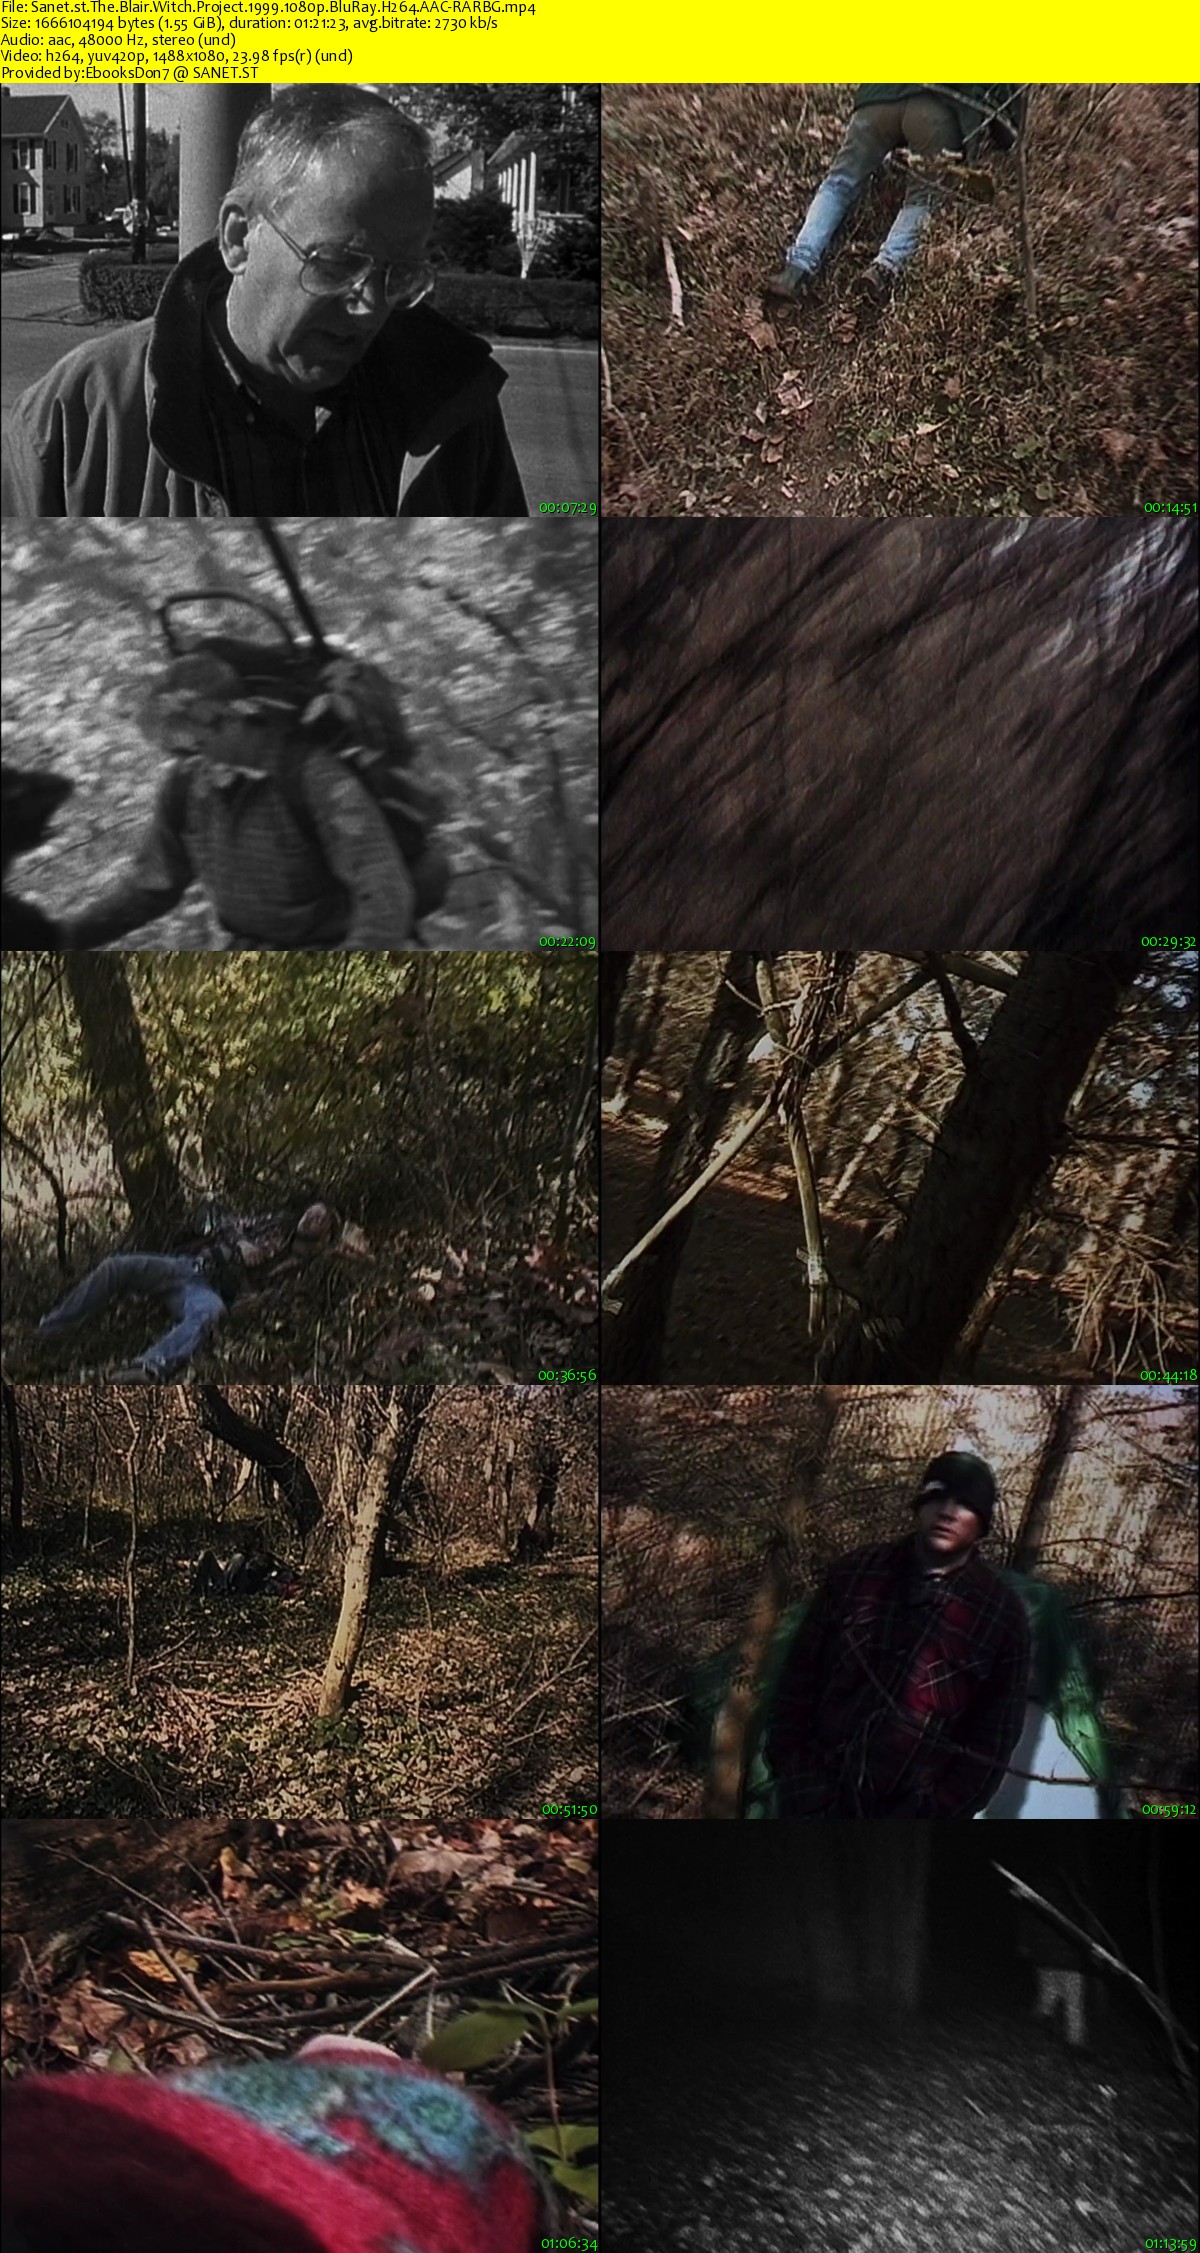 download free the blair witch project 1999